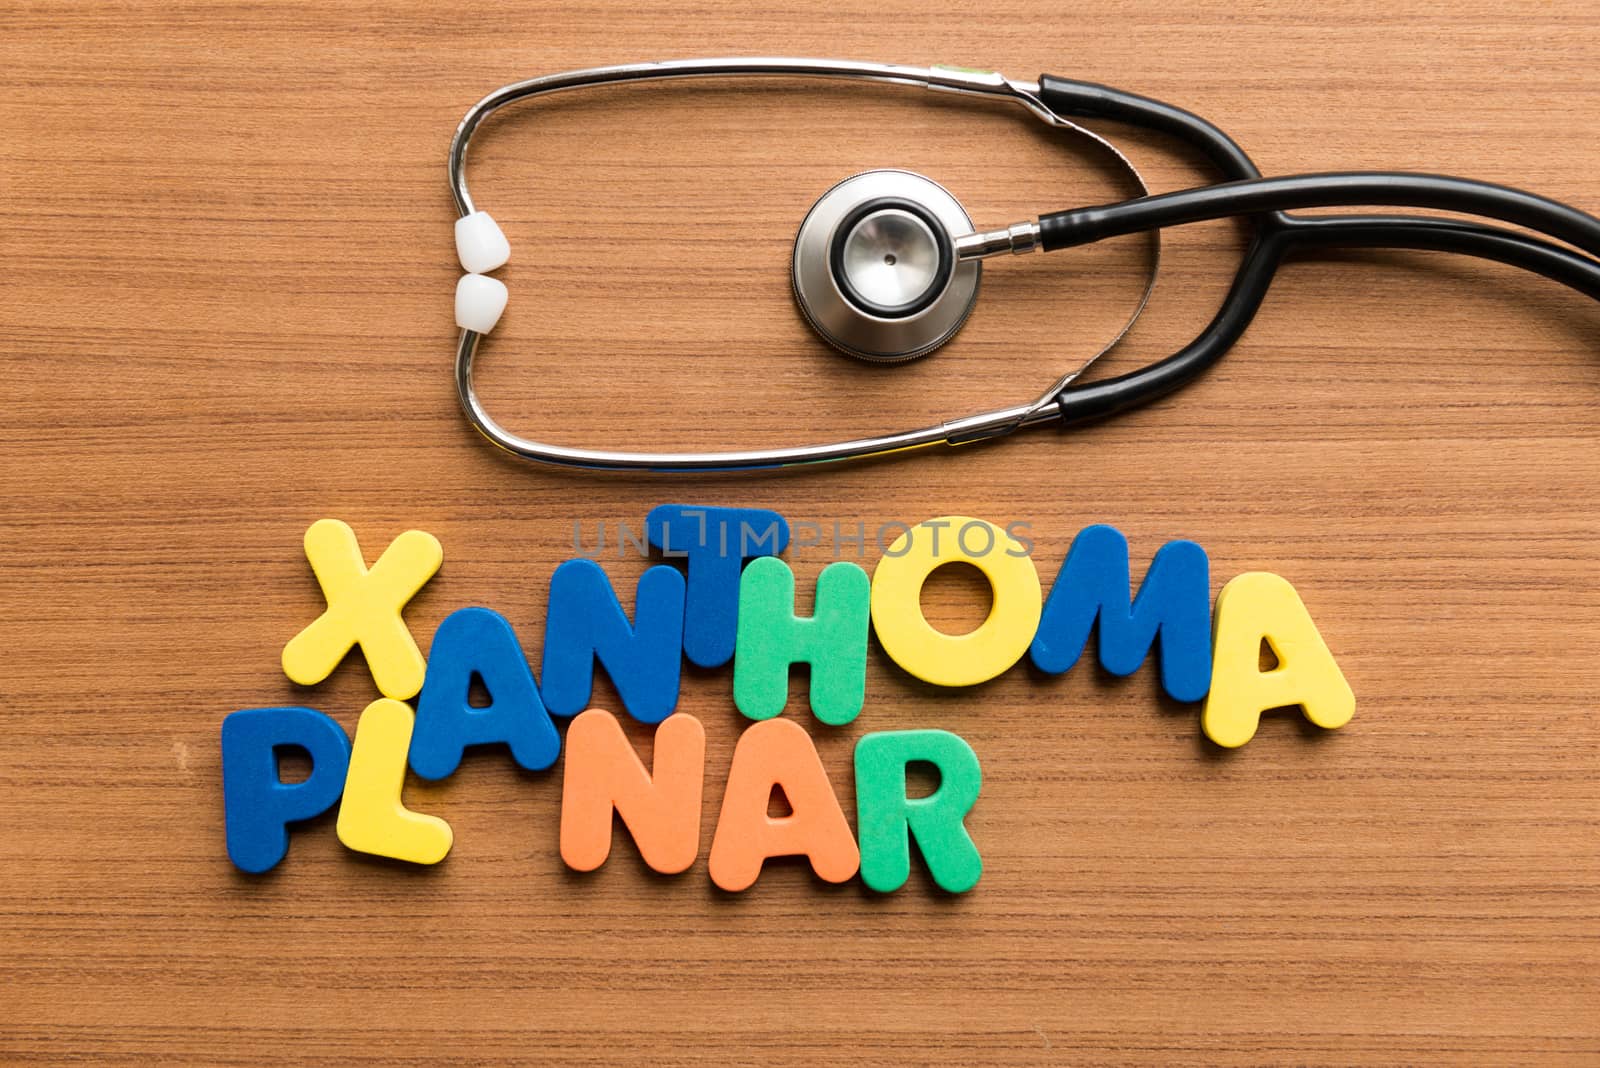 xanthoma planar colorful word with stethoscope by sohel.parvez@hotmail.com